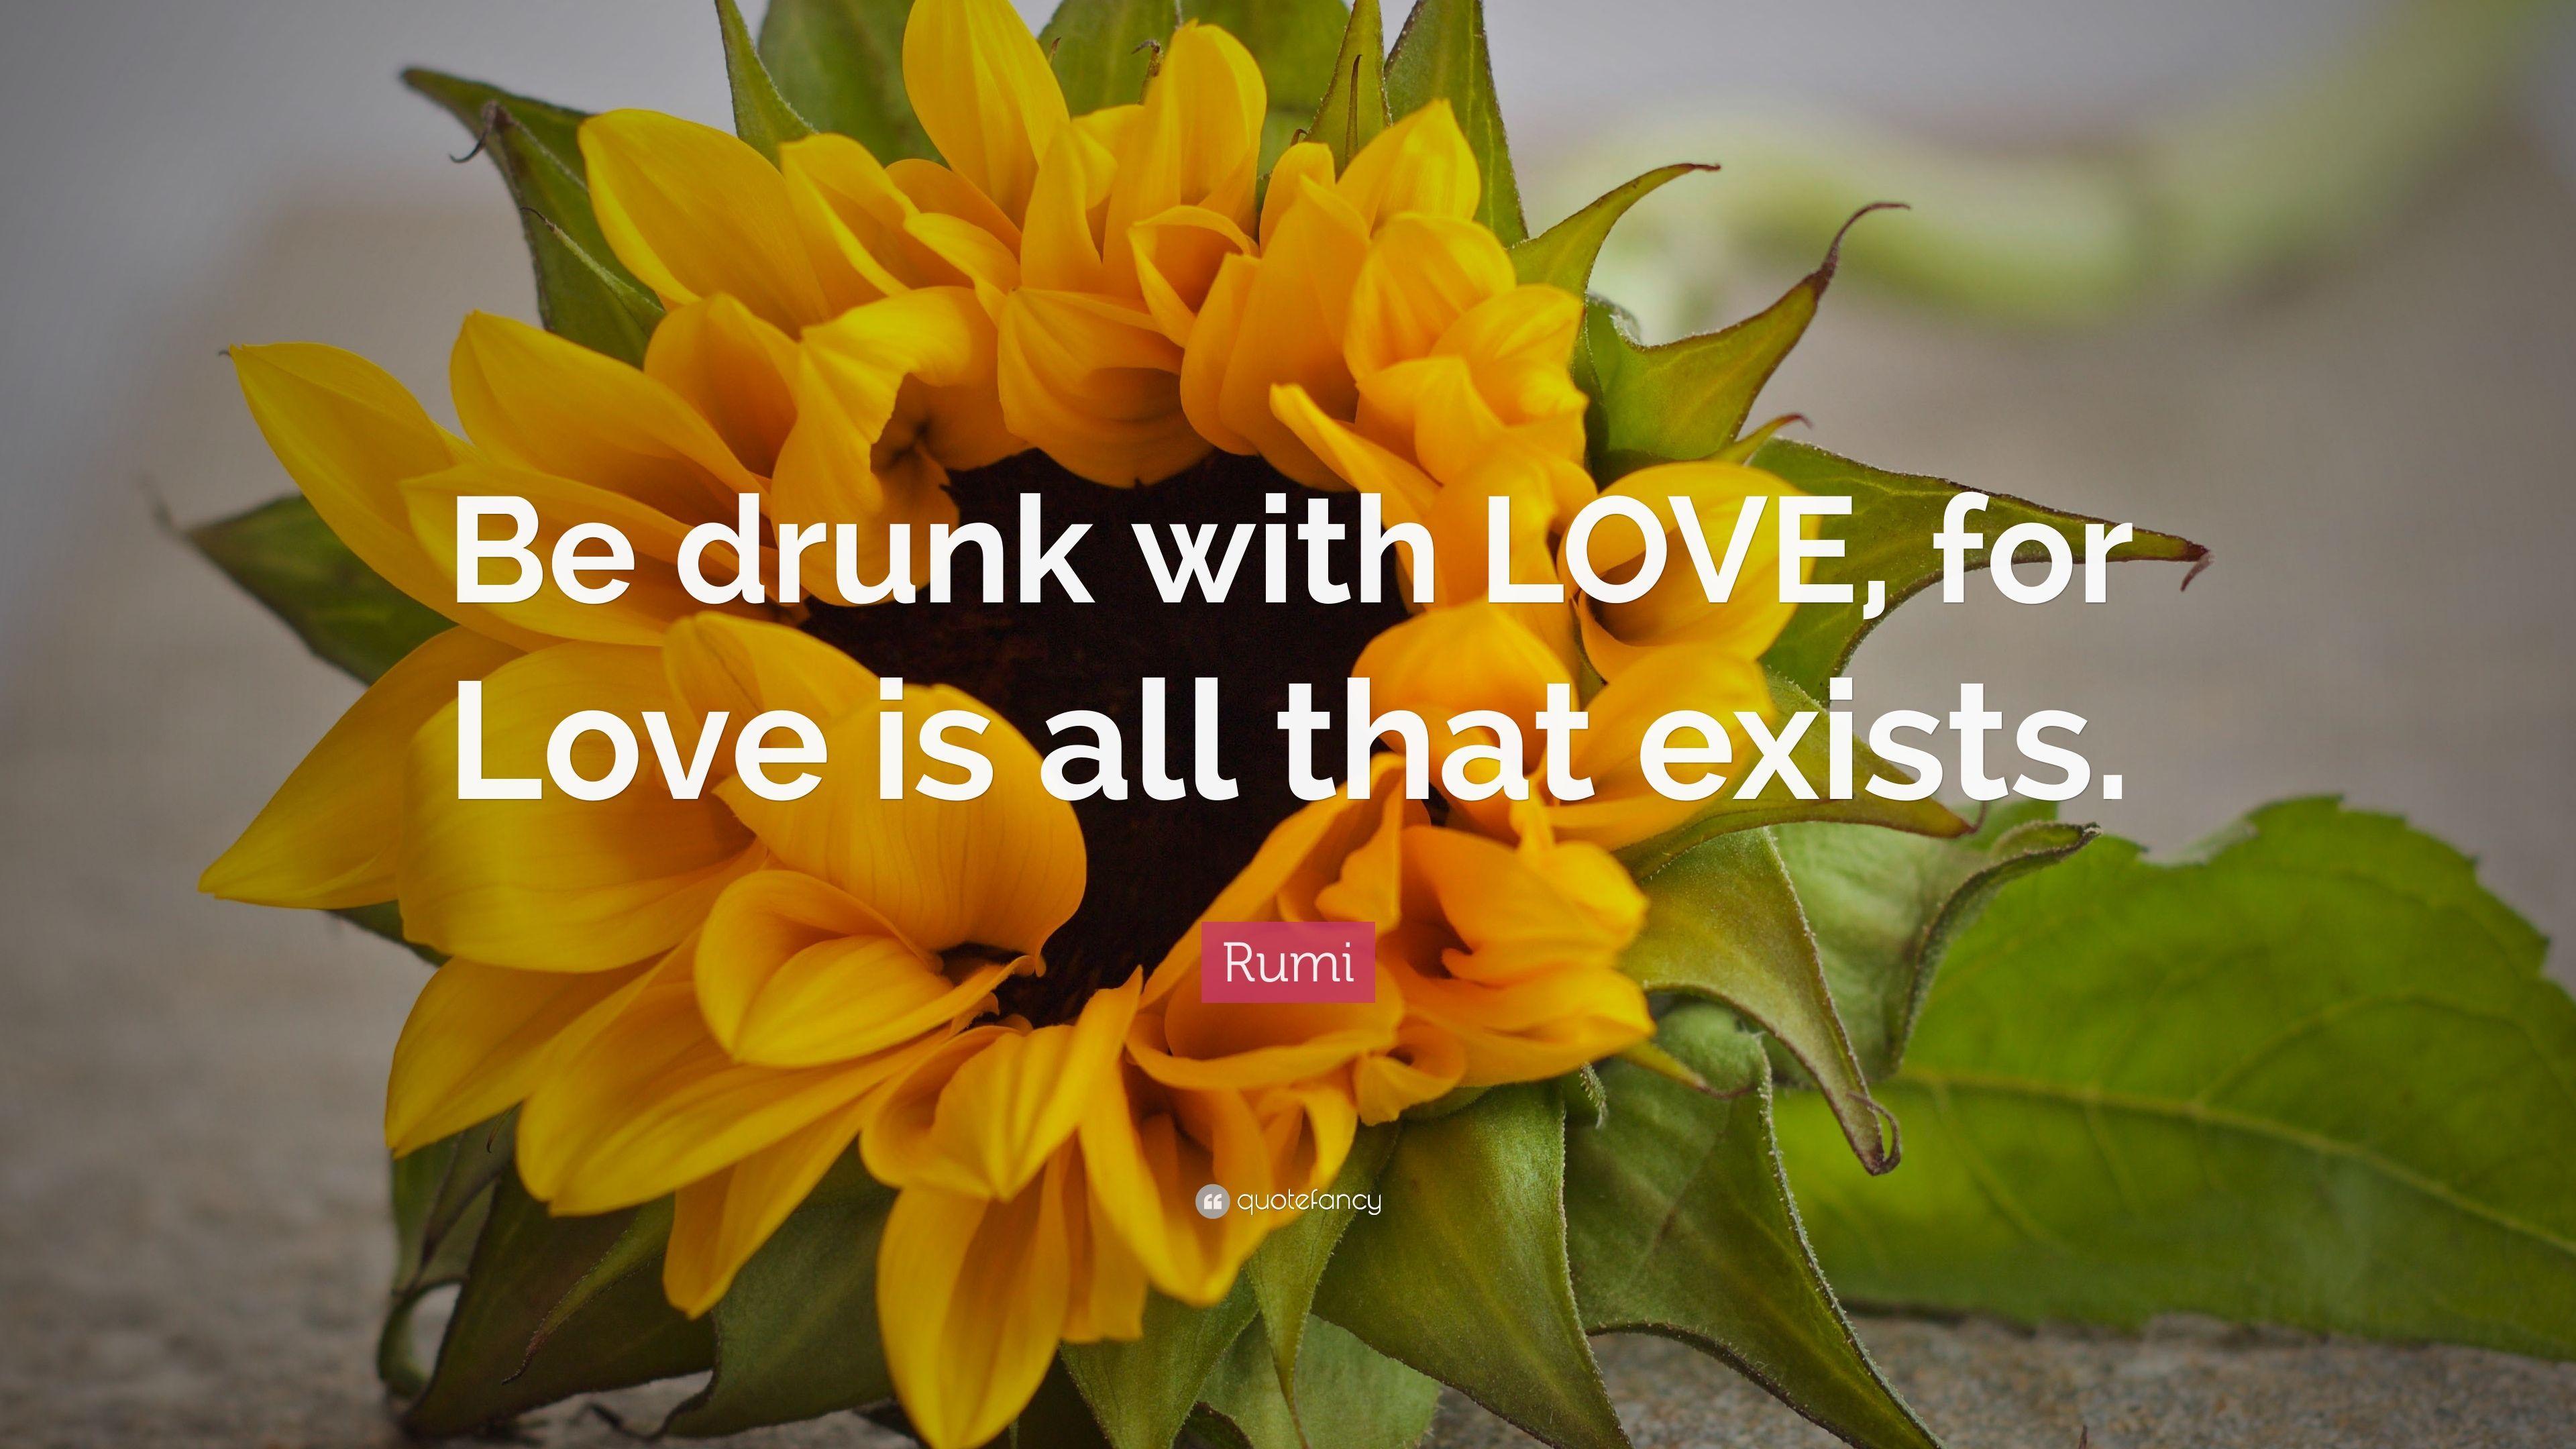 Rumi Quote: “Be drunk with LOVE, for Love is all that exists.” 2